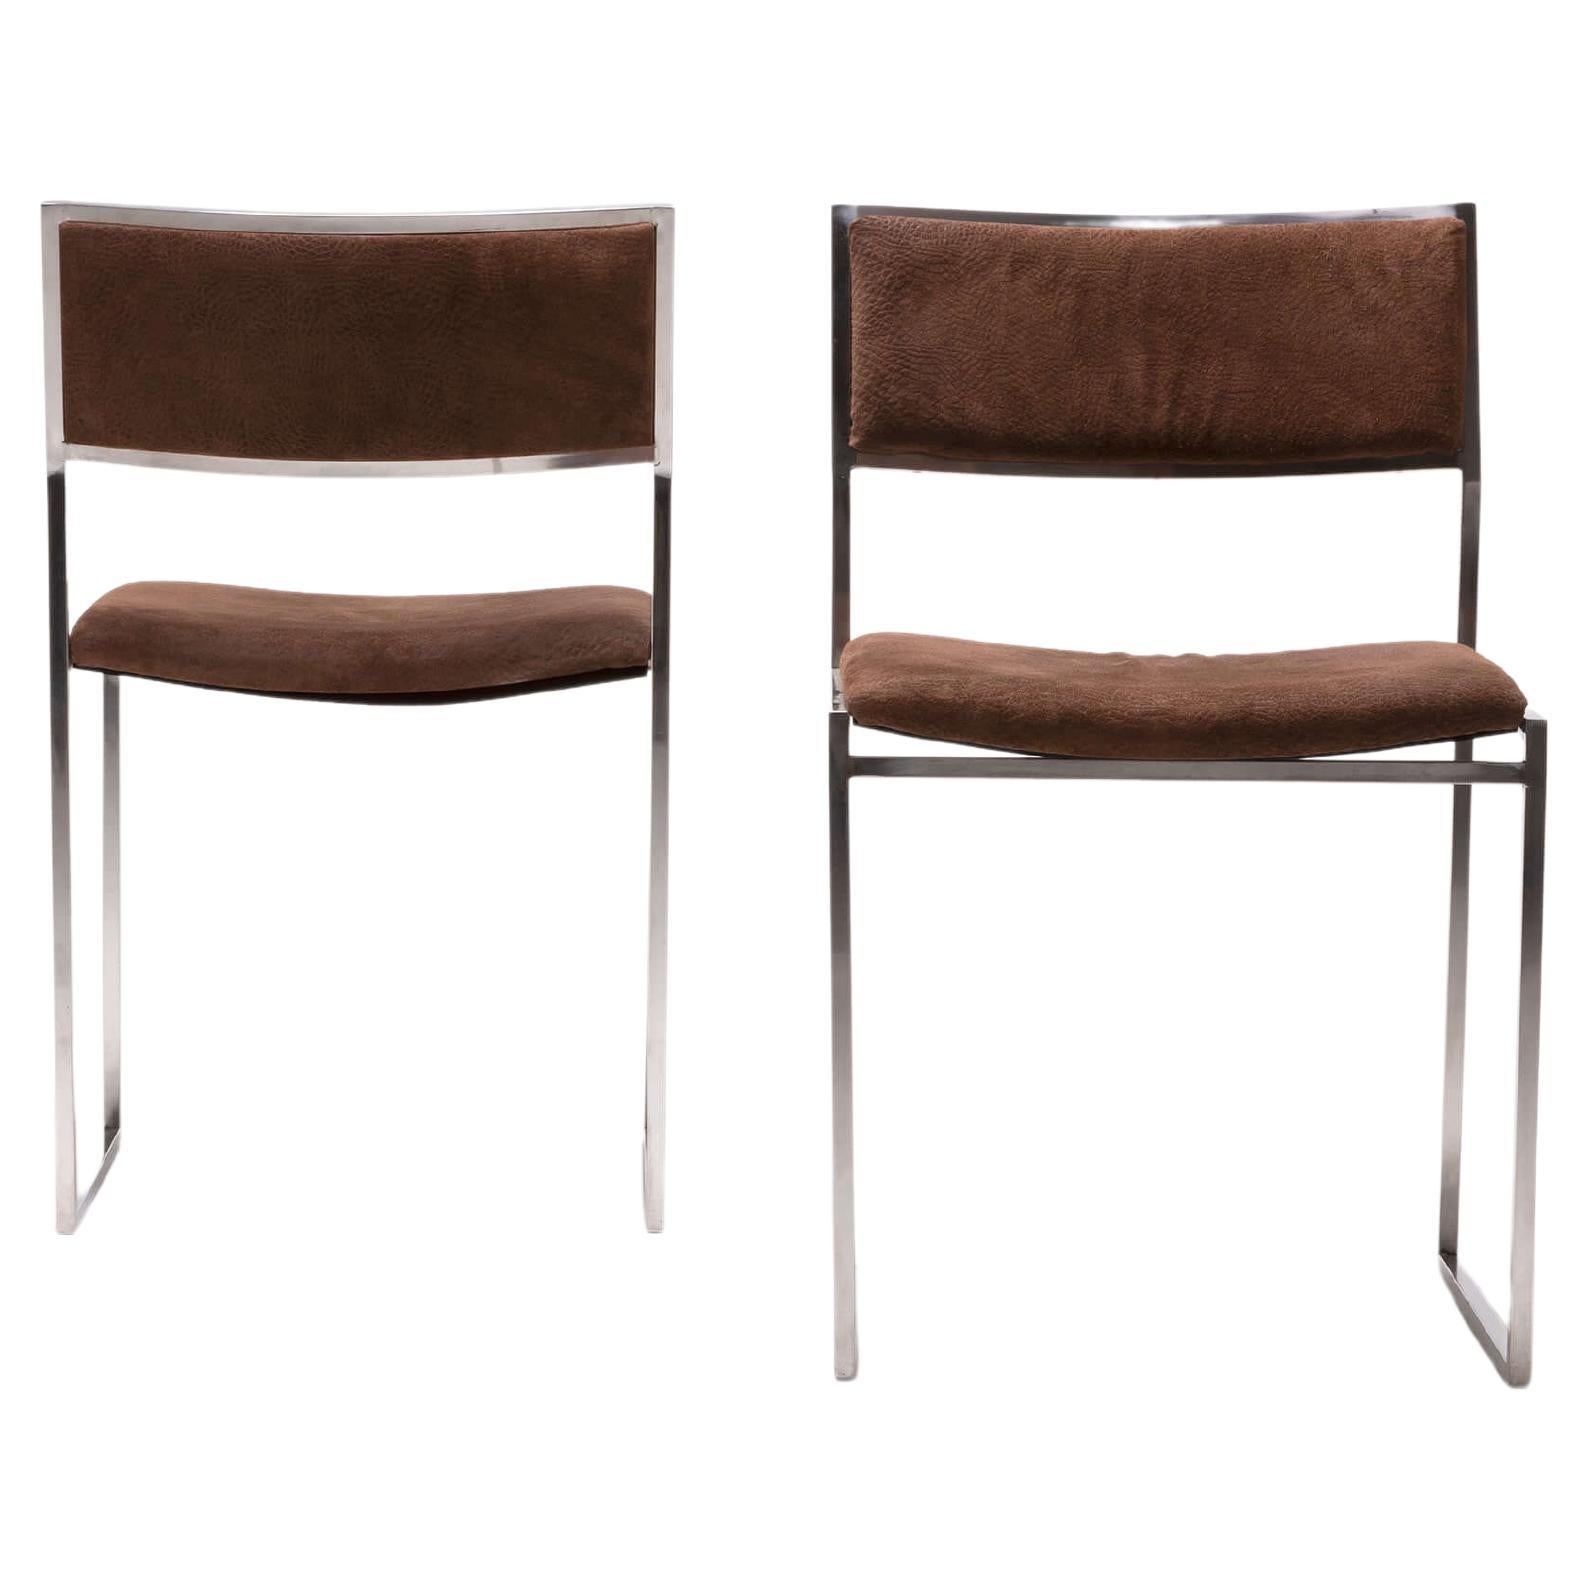 Willy Rizzo Peccary Leather SQ Chairs with Stainless Steel Structure, circa 1970